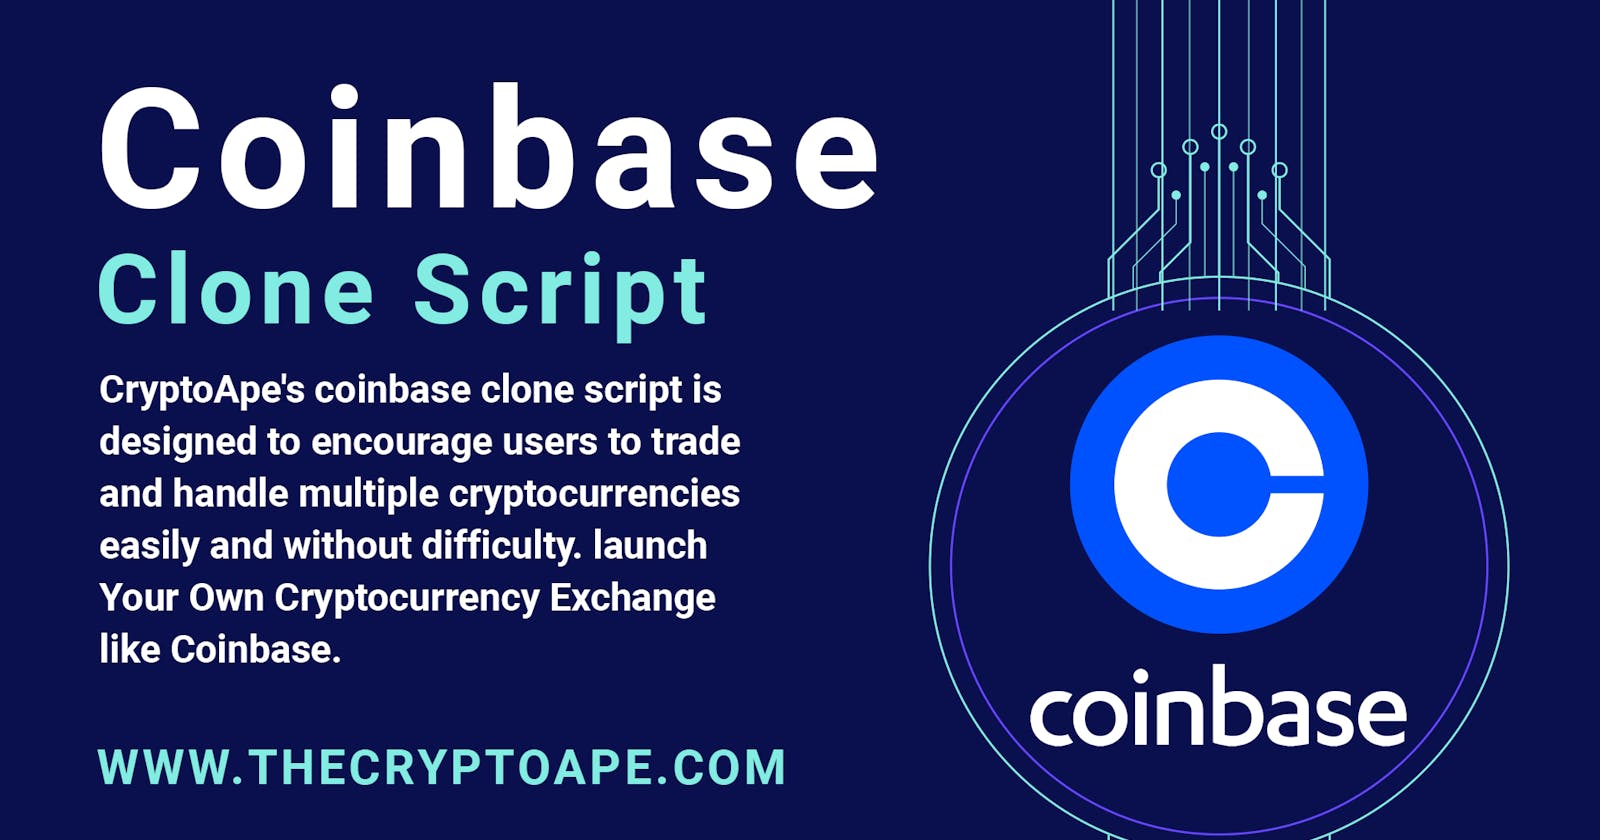 What is White Label Coinbase Clone Script?